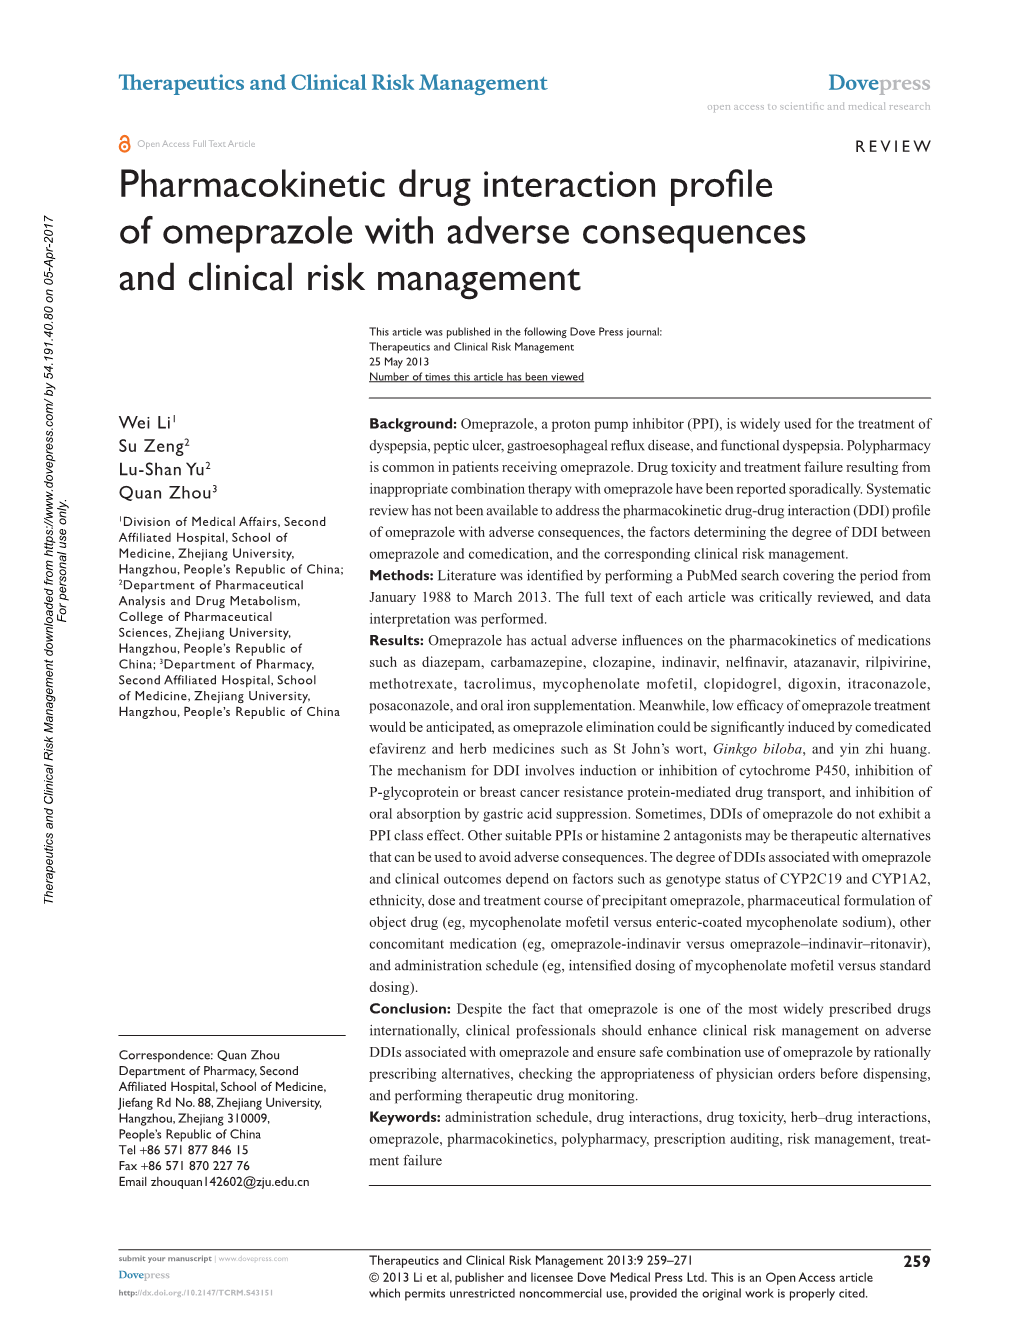 Pharmacokinetic Drug Interaction Profile of Omeprazole with Adverse Consequences and Clinical Risk Management